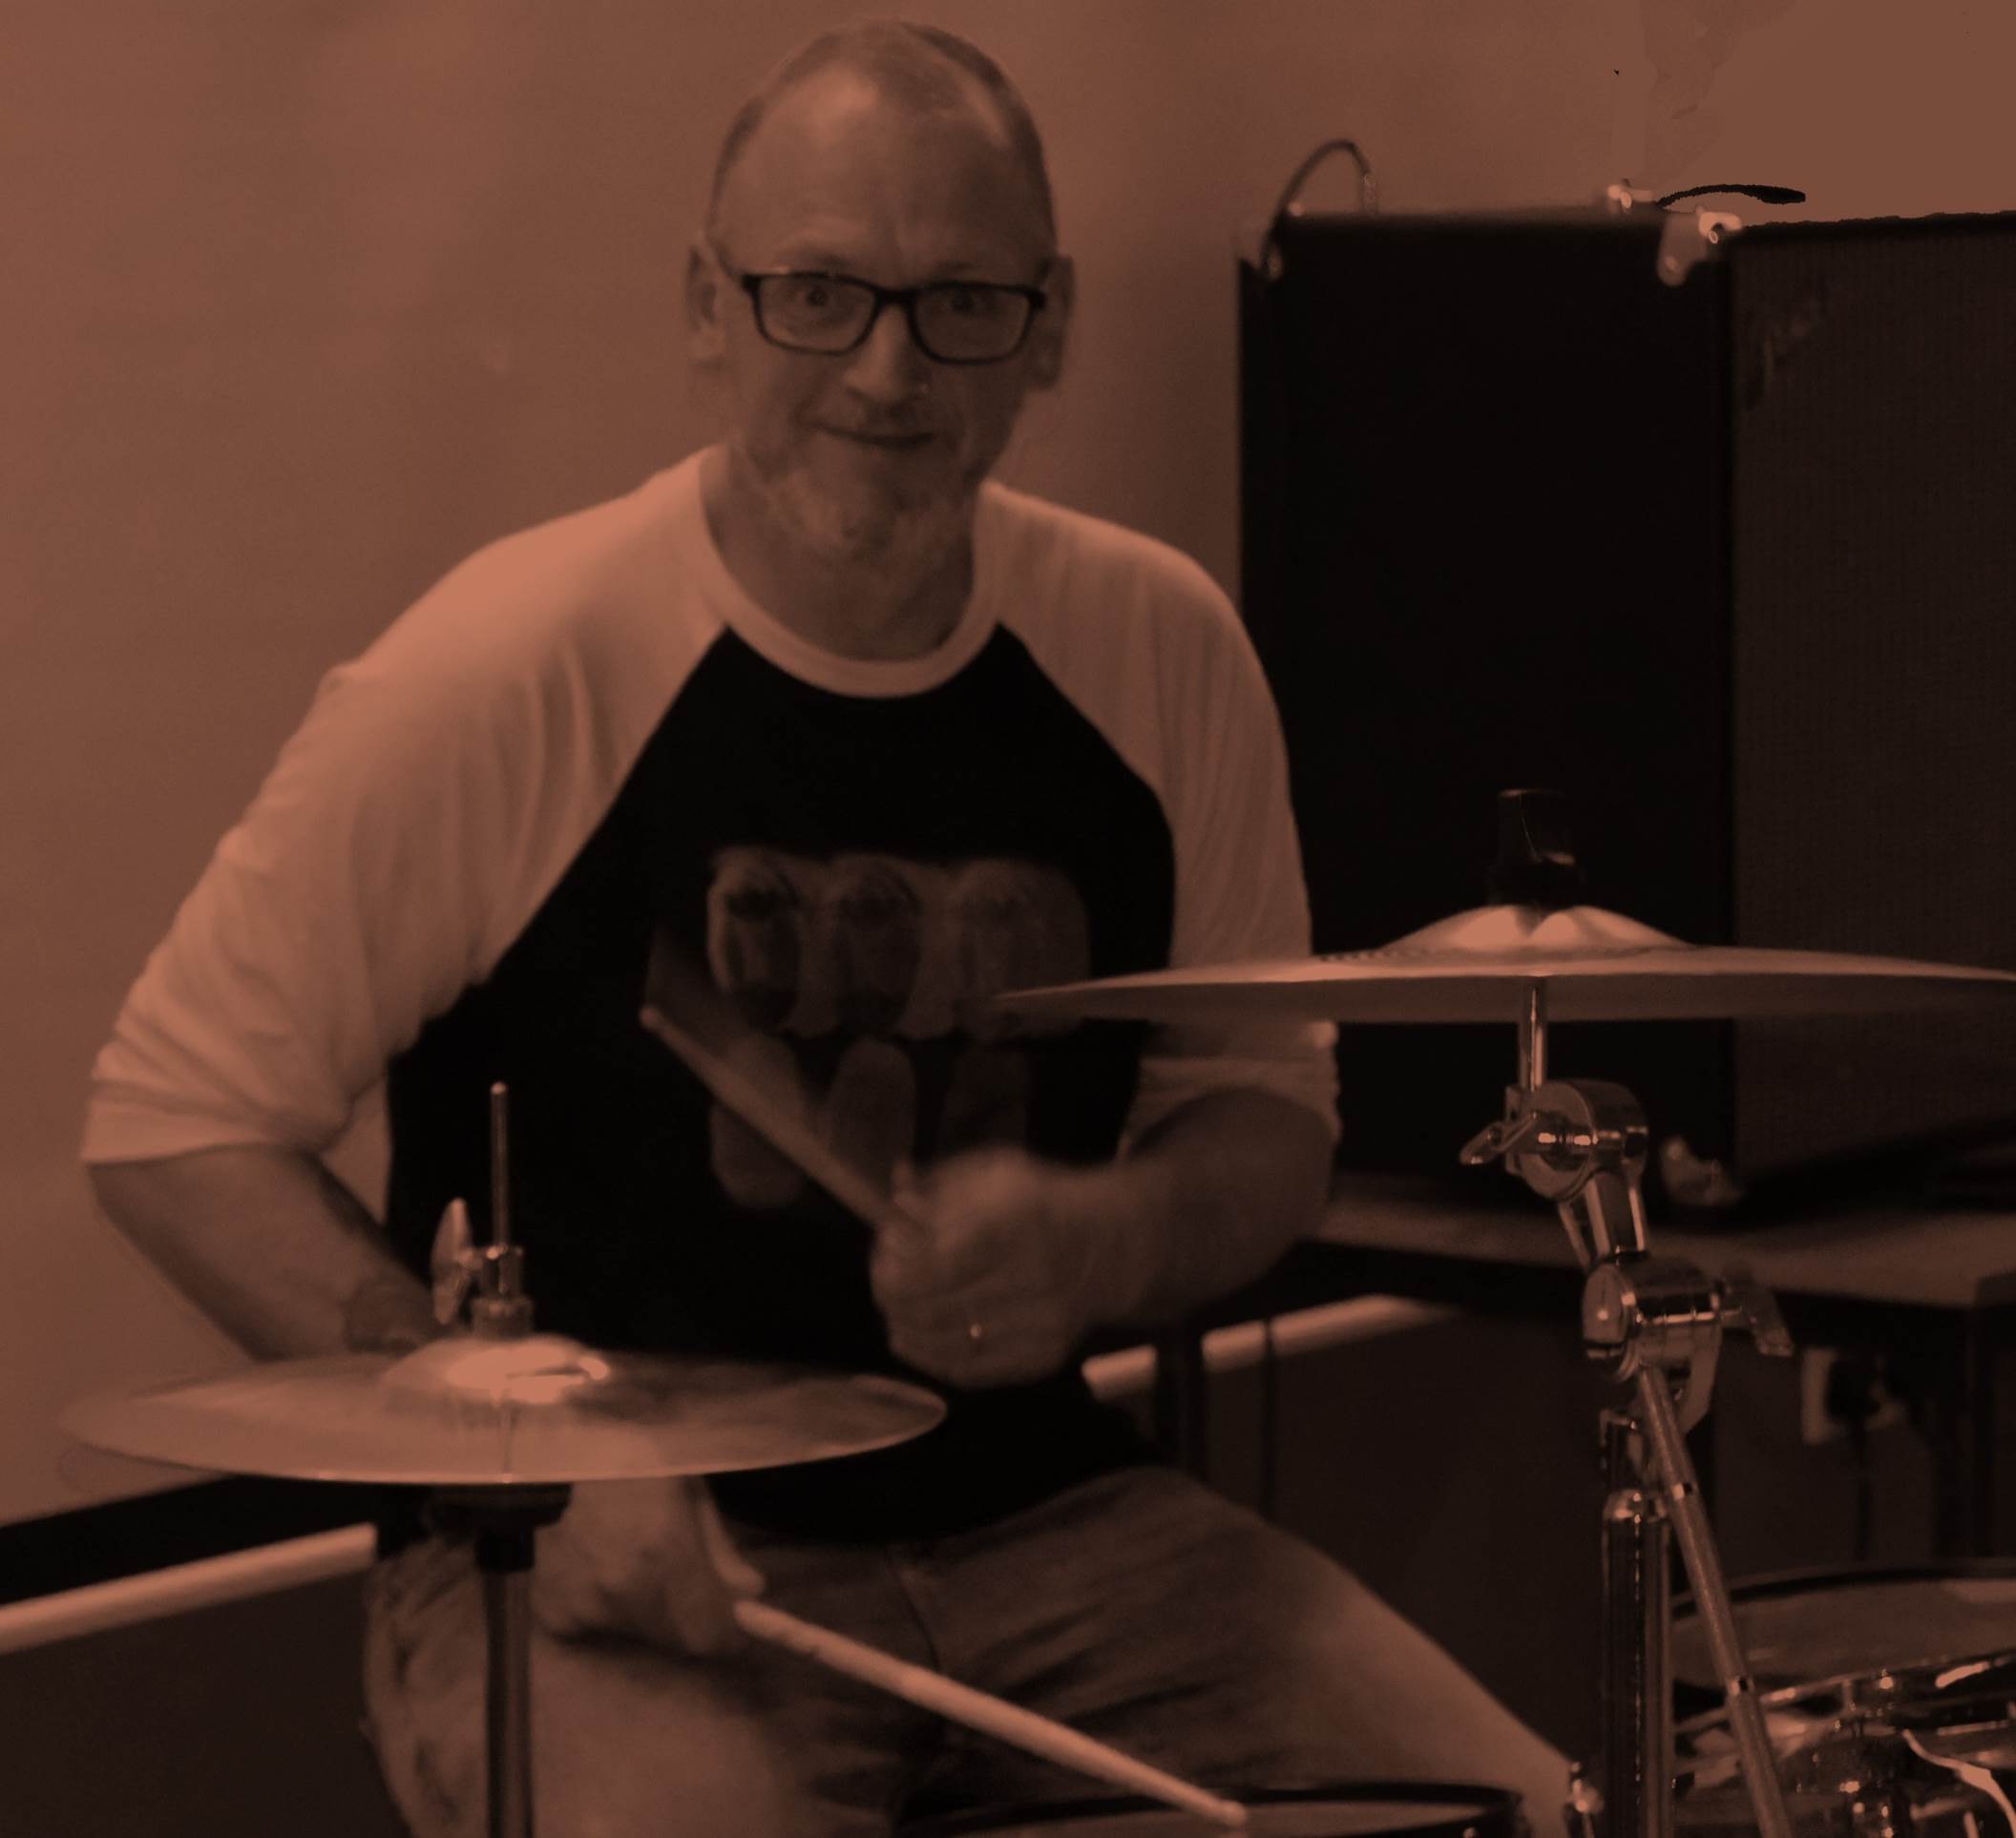 A person playing drums

Description automatically generated with medium confidence